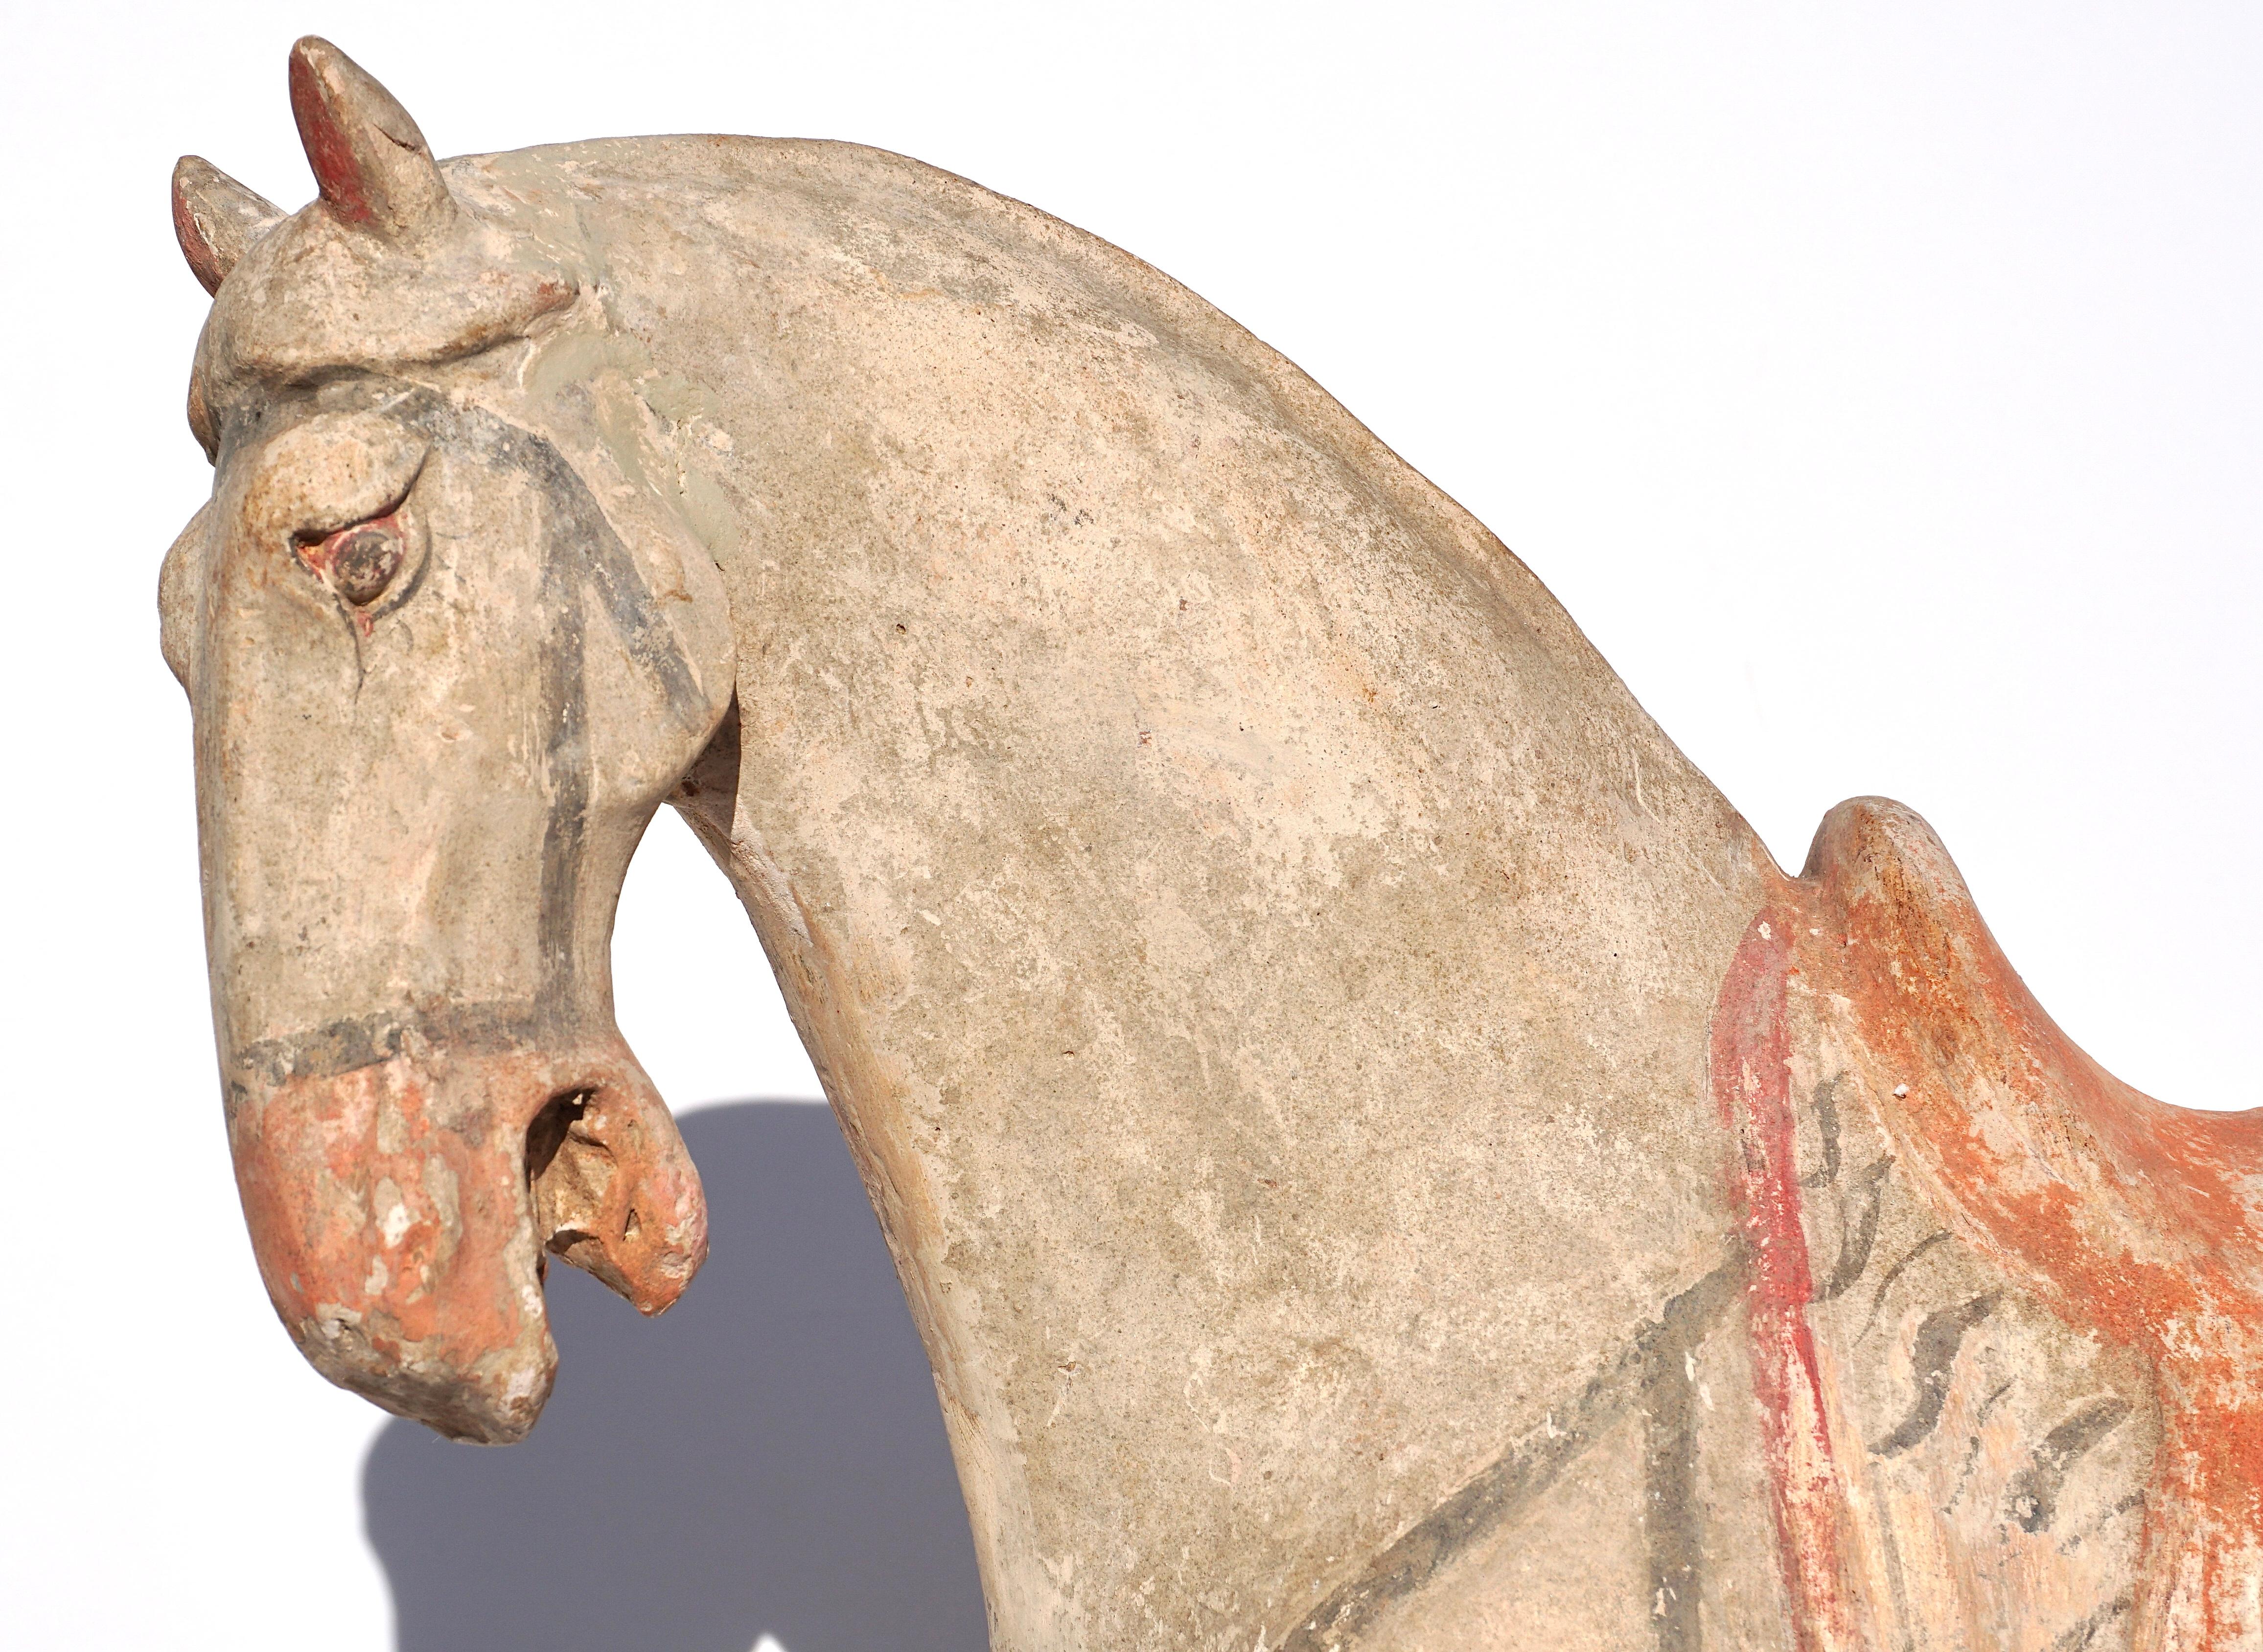 Authenticated and dated by Ralf Kotalla Laboratories in Germany Report # 05PX240220 included with acquisition.

Ca. 618 - 907 AD Tang Dynasty Terracotta Horse figure with saddle and turned head. An elegant hollow molded pottery horse modeled in a